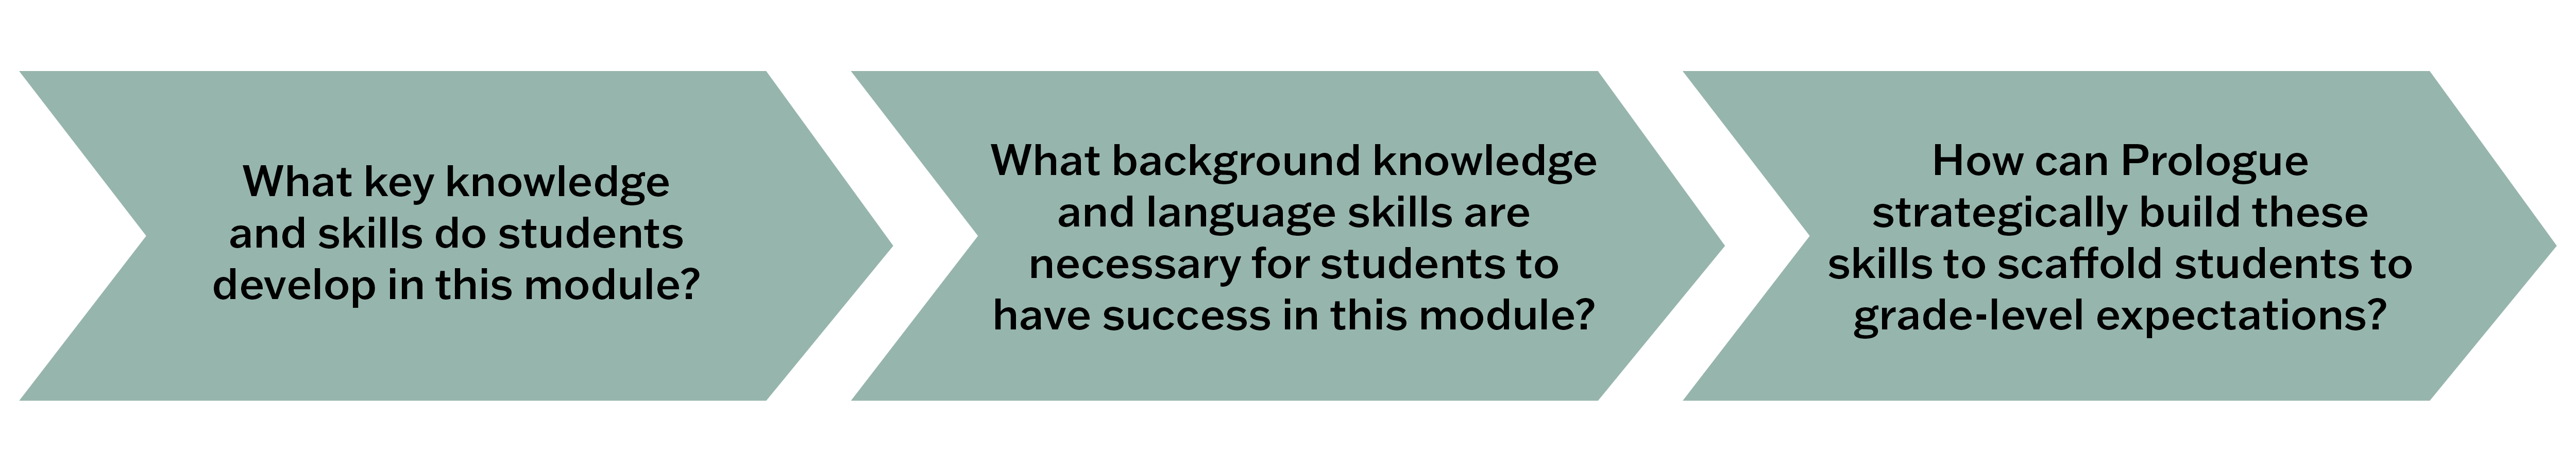 What key knowledge and skills do students develop in this module? What background knowledge and language skills are necessary for students to have success in this module? How can Prologue strategically build these skills to scaffold students to grade-level expectations?